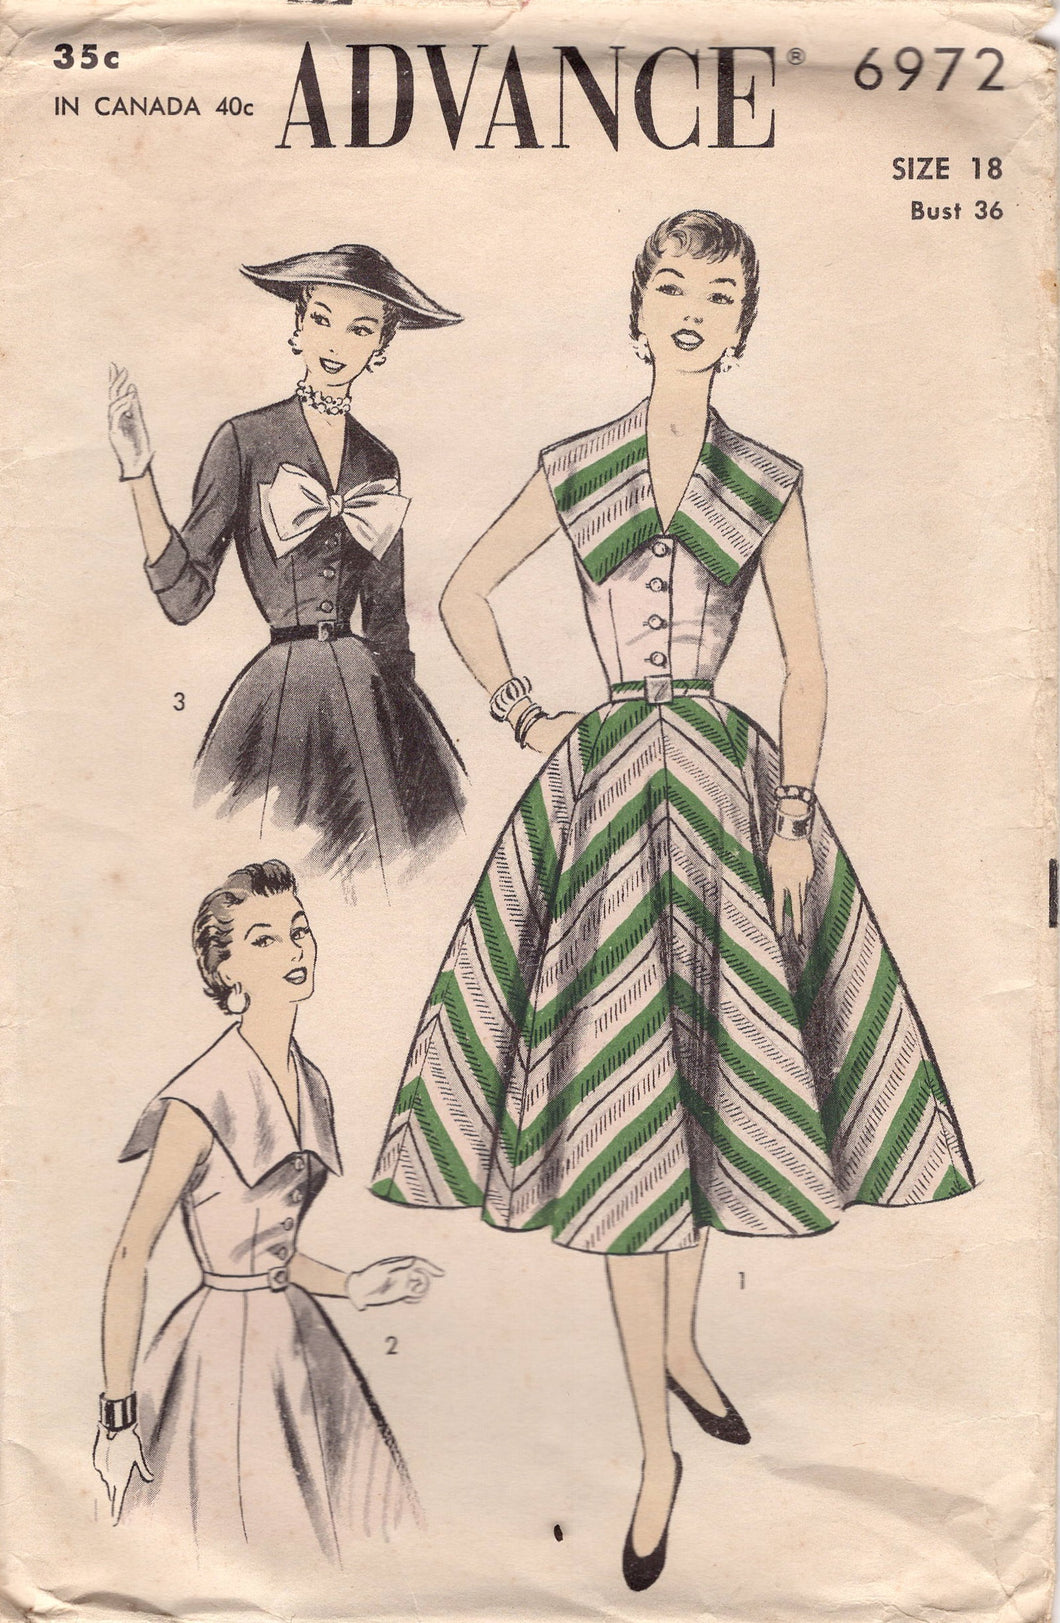 1950's Advance Shirtwaist Dress with 8 Gore Skirt and Large Collar or Bow - Bust 36